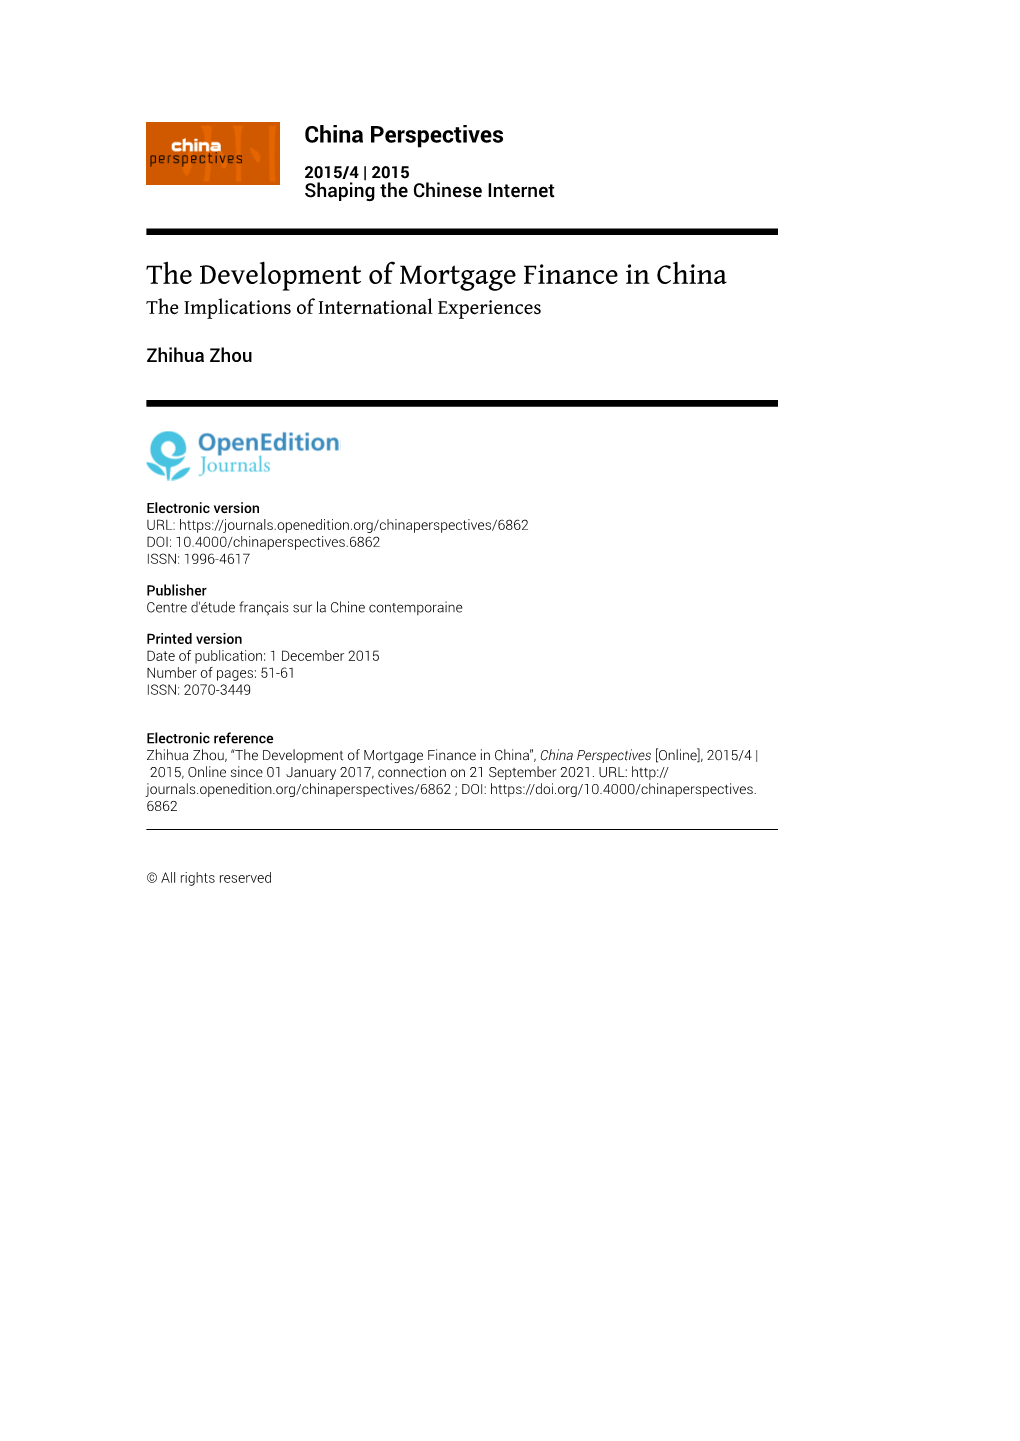 The Development of Mortgage Finance in China the Implications of International Experiences